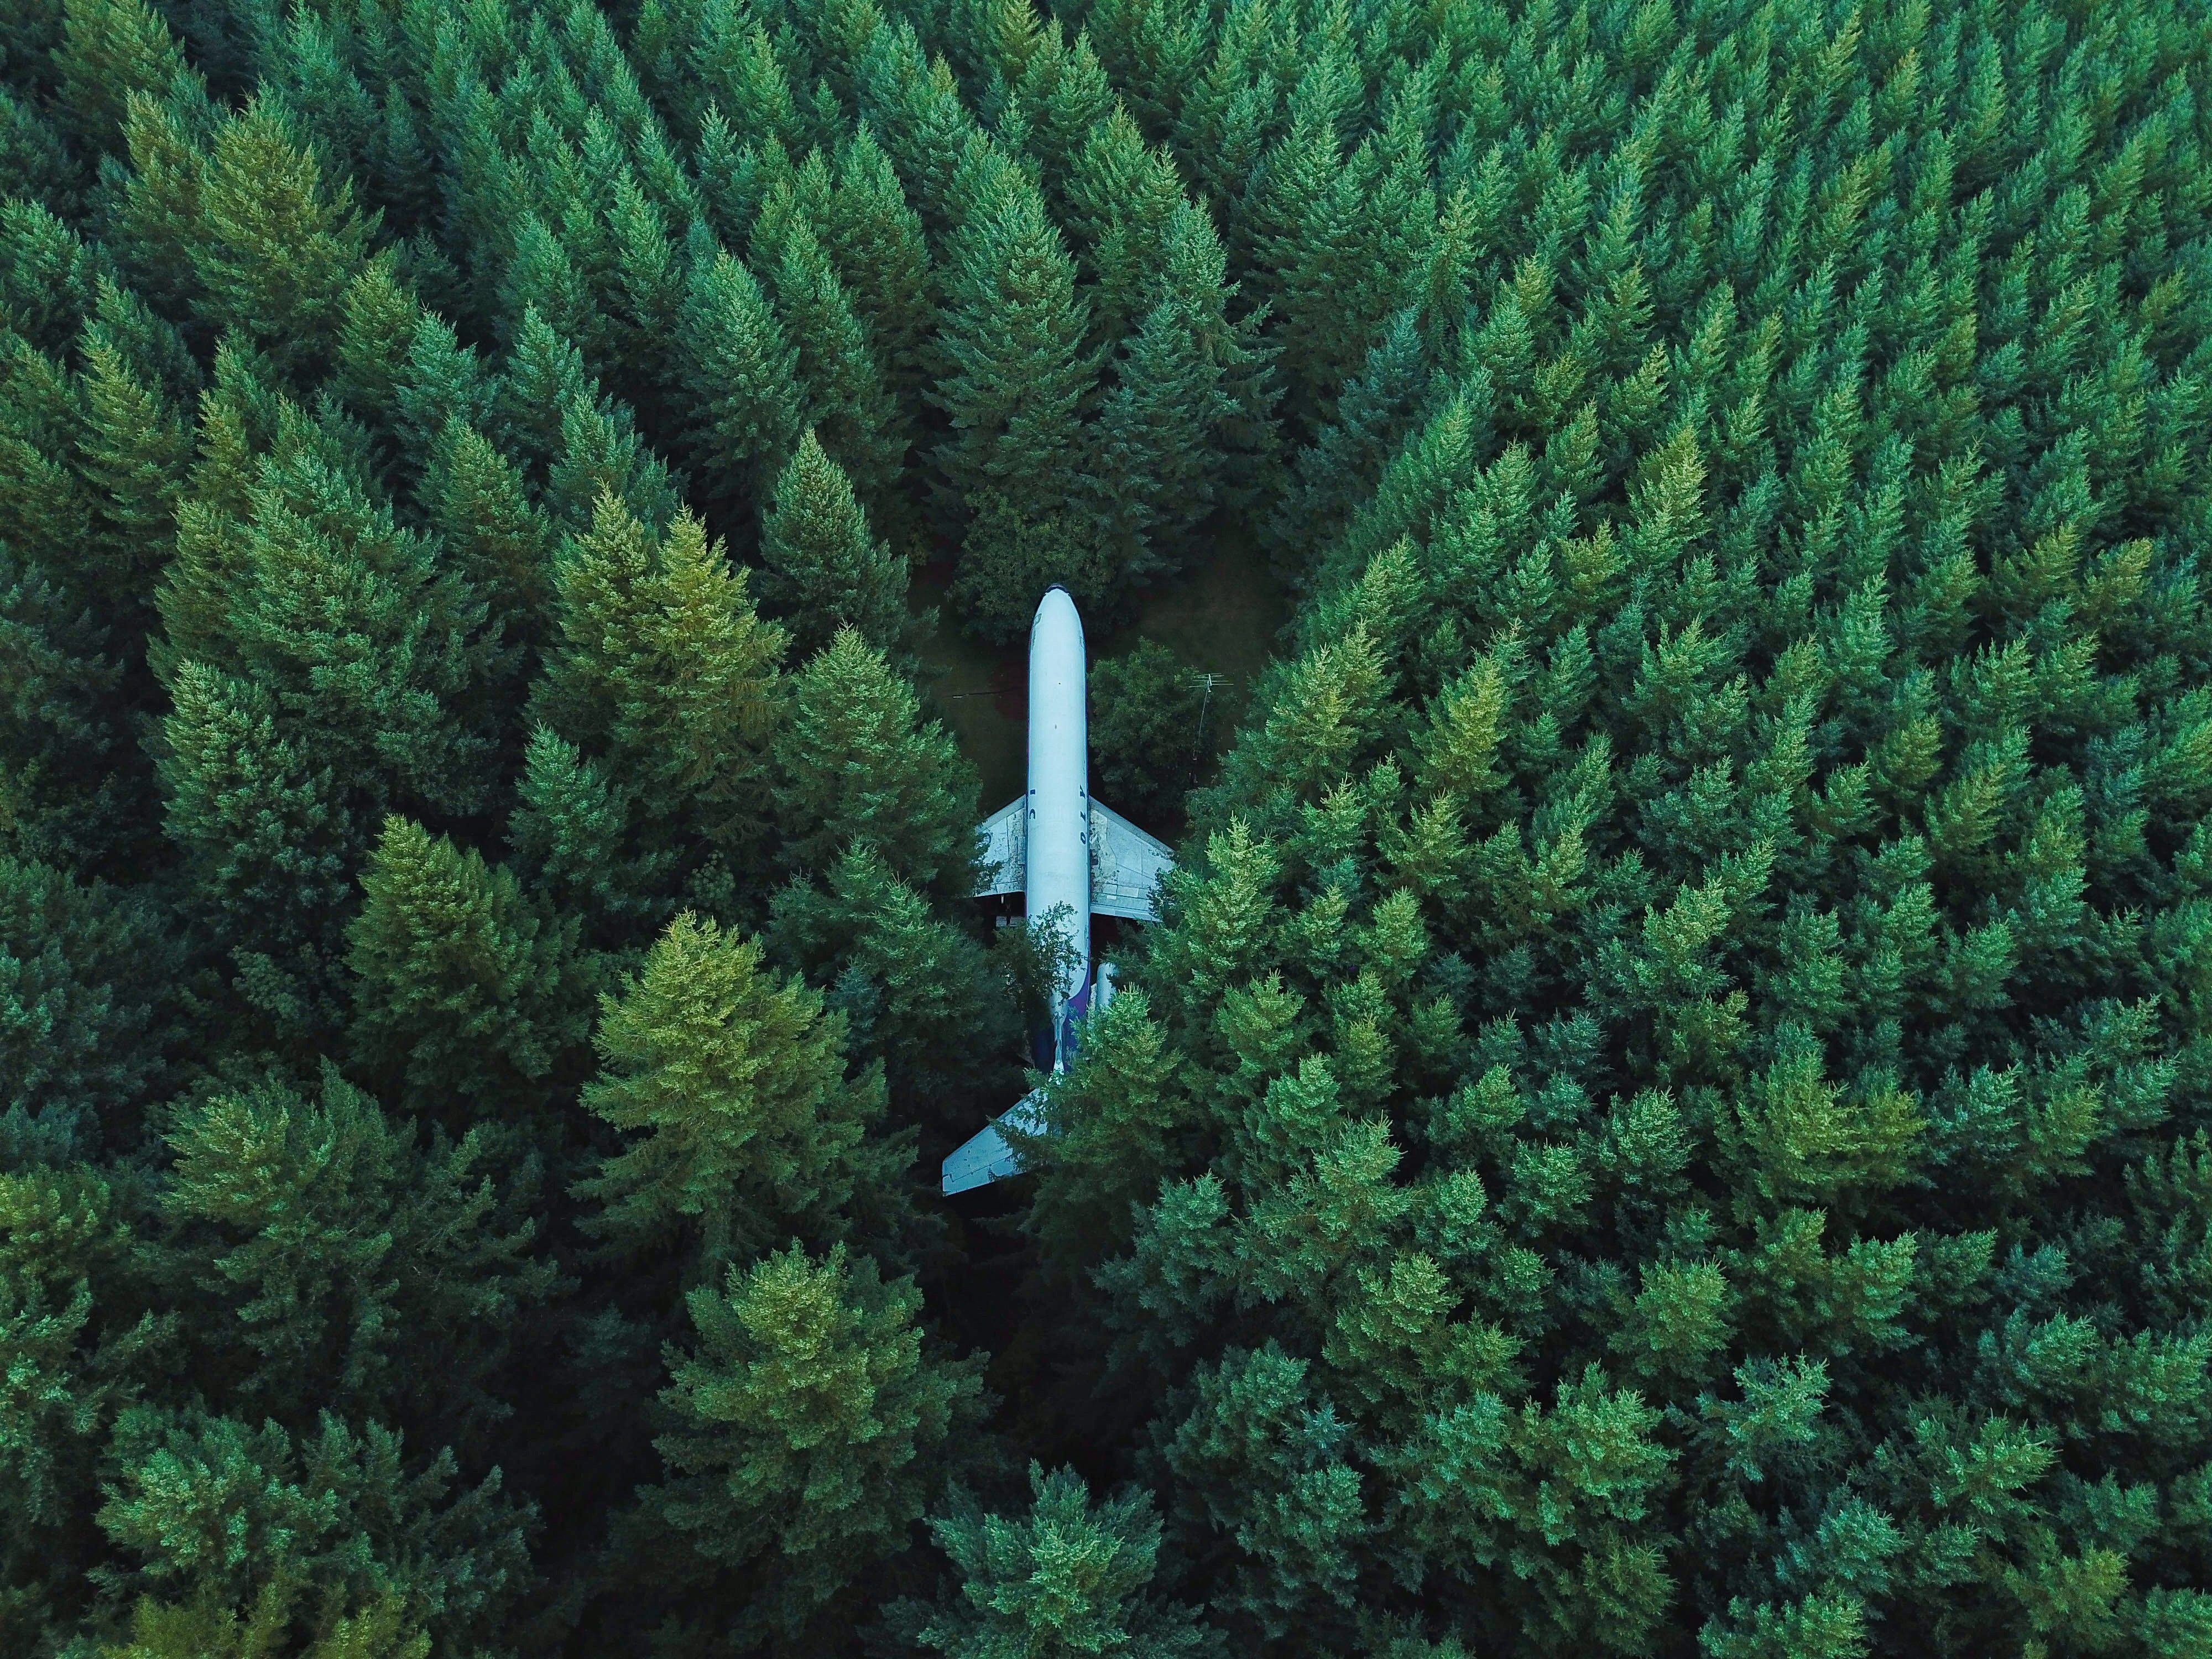 Free HD plane, miscellanea, trees, view from above, miscellaneous, airplane